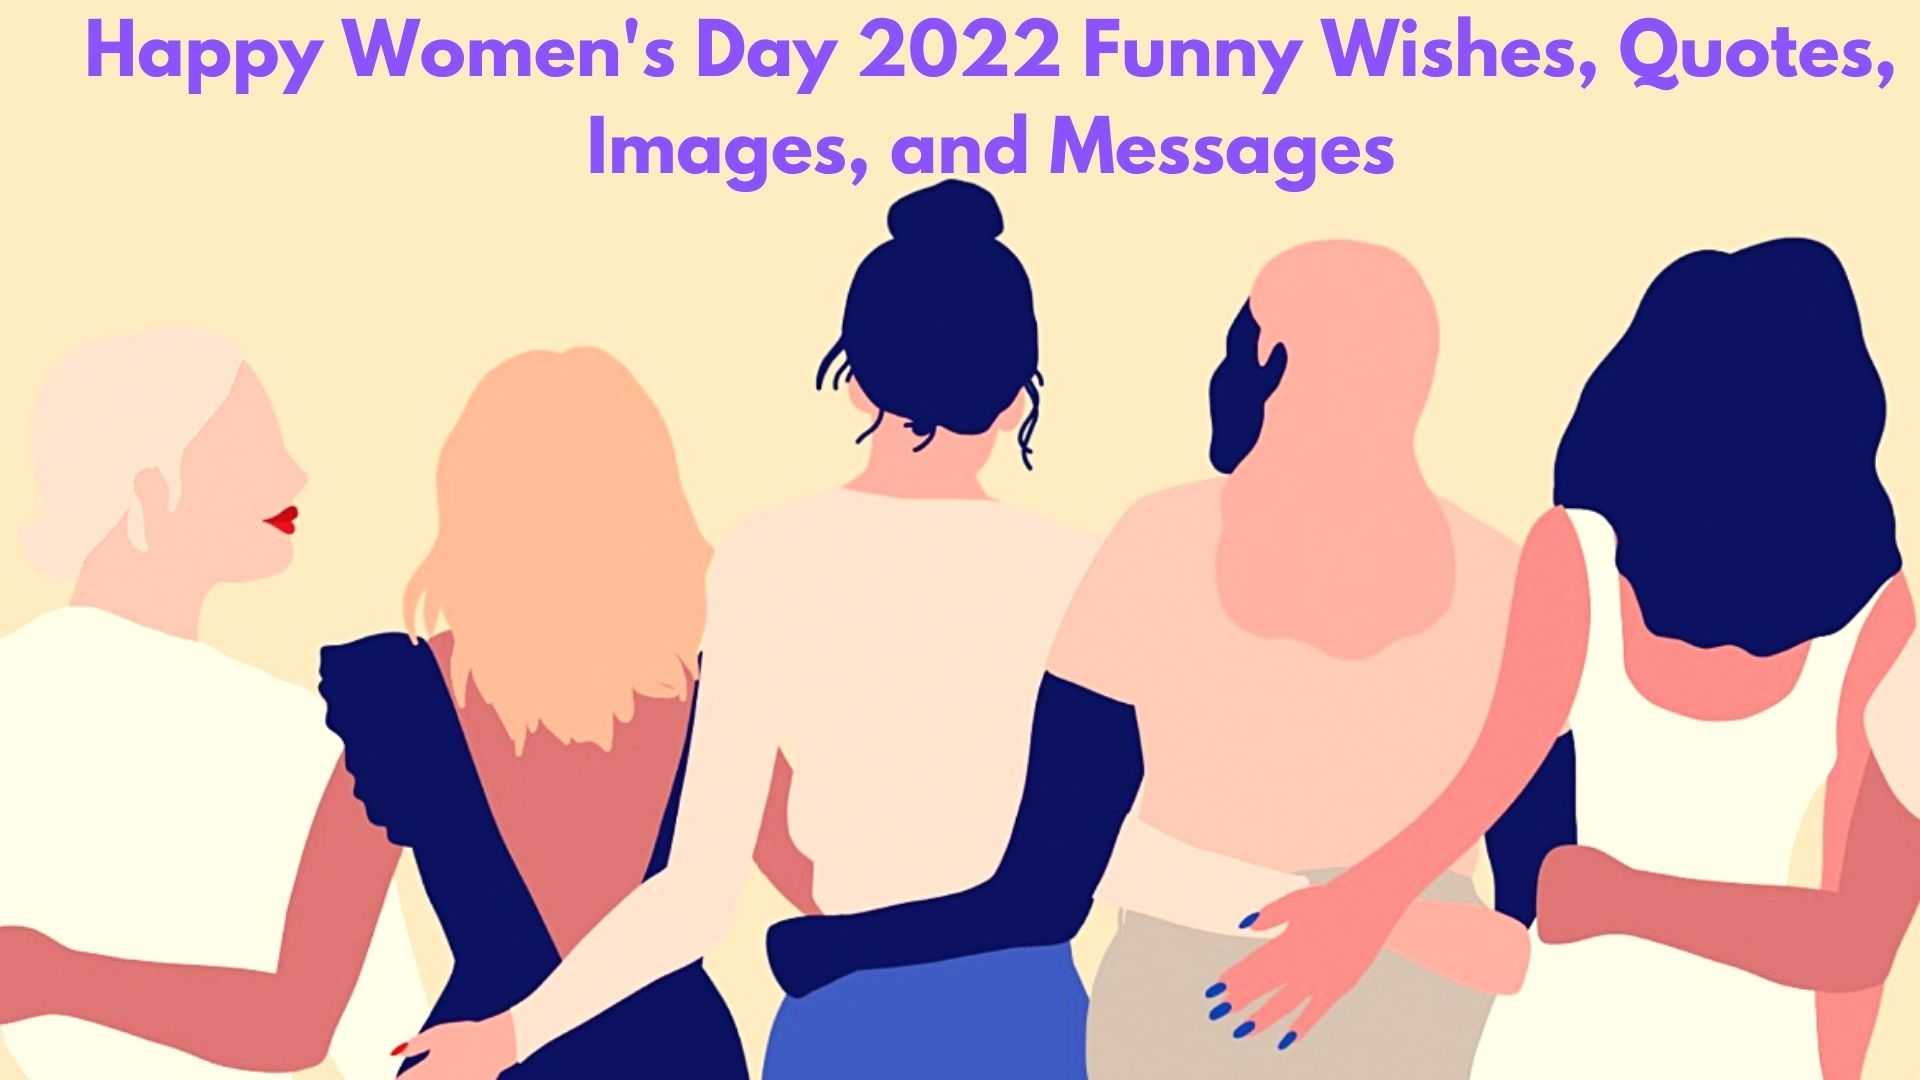 Happy Women's Day 2022 Funny Images